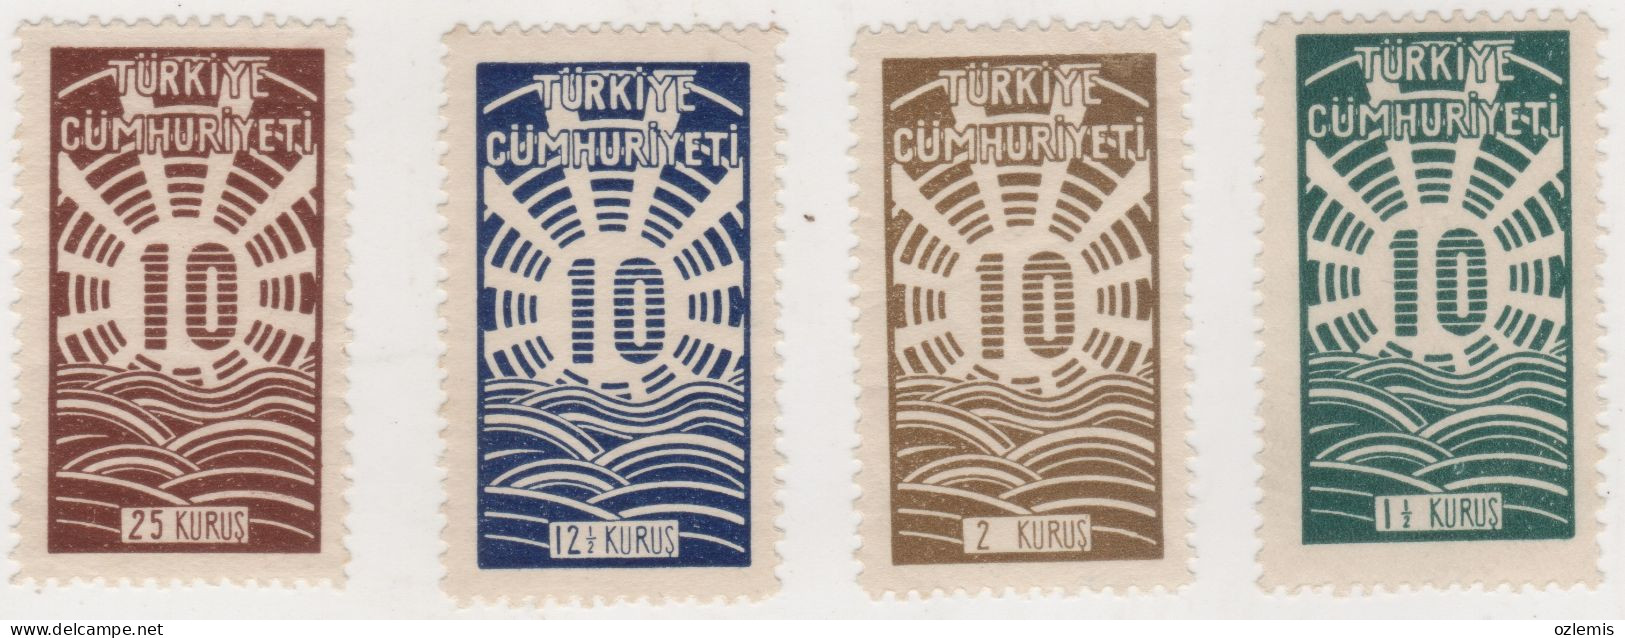 TURKEY,TURKEI,TURQUIE ,1933 ,COMMEMORATIVE STAMPS FOR THE 100TH ANIVERSARY OF THE REPUBLIC,,,STAMP,MNH - Ungebraucht